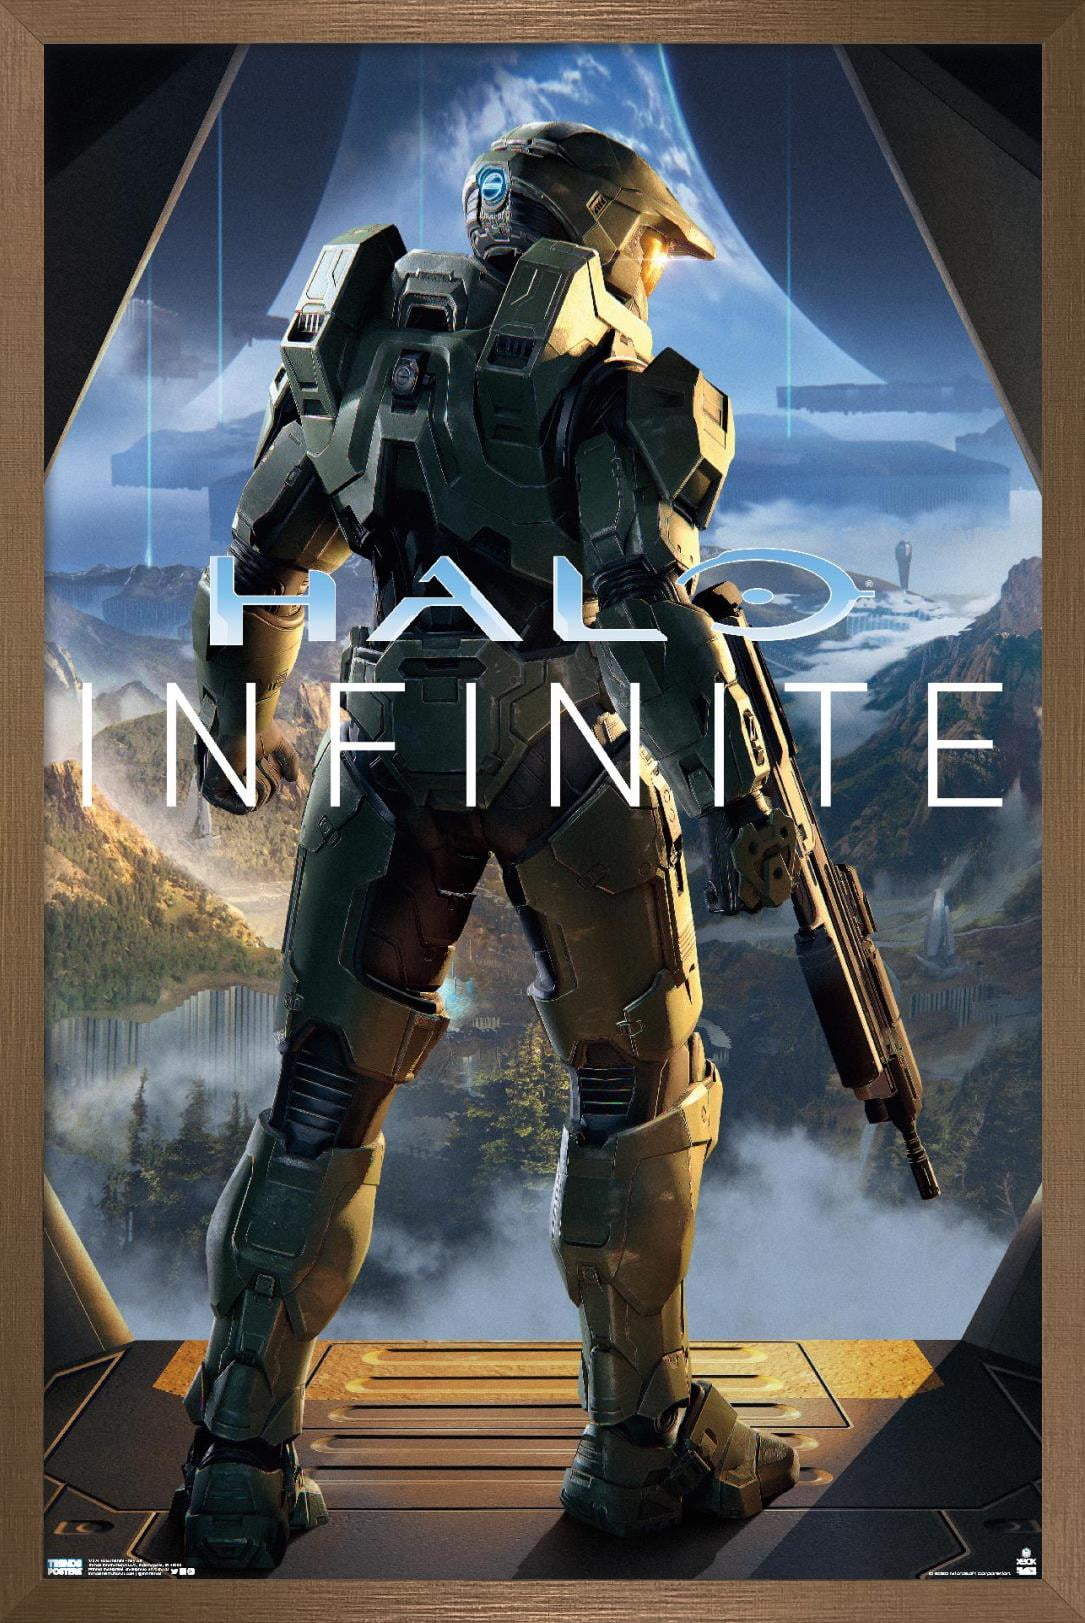 Poster Halo 5 - Master chief, Wall Art, Gifts & Merchandise